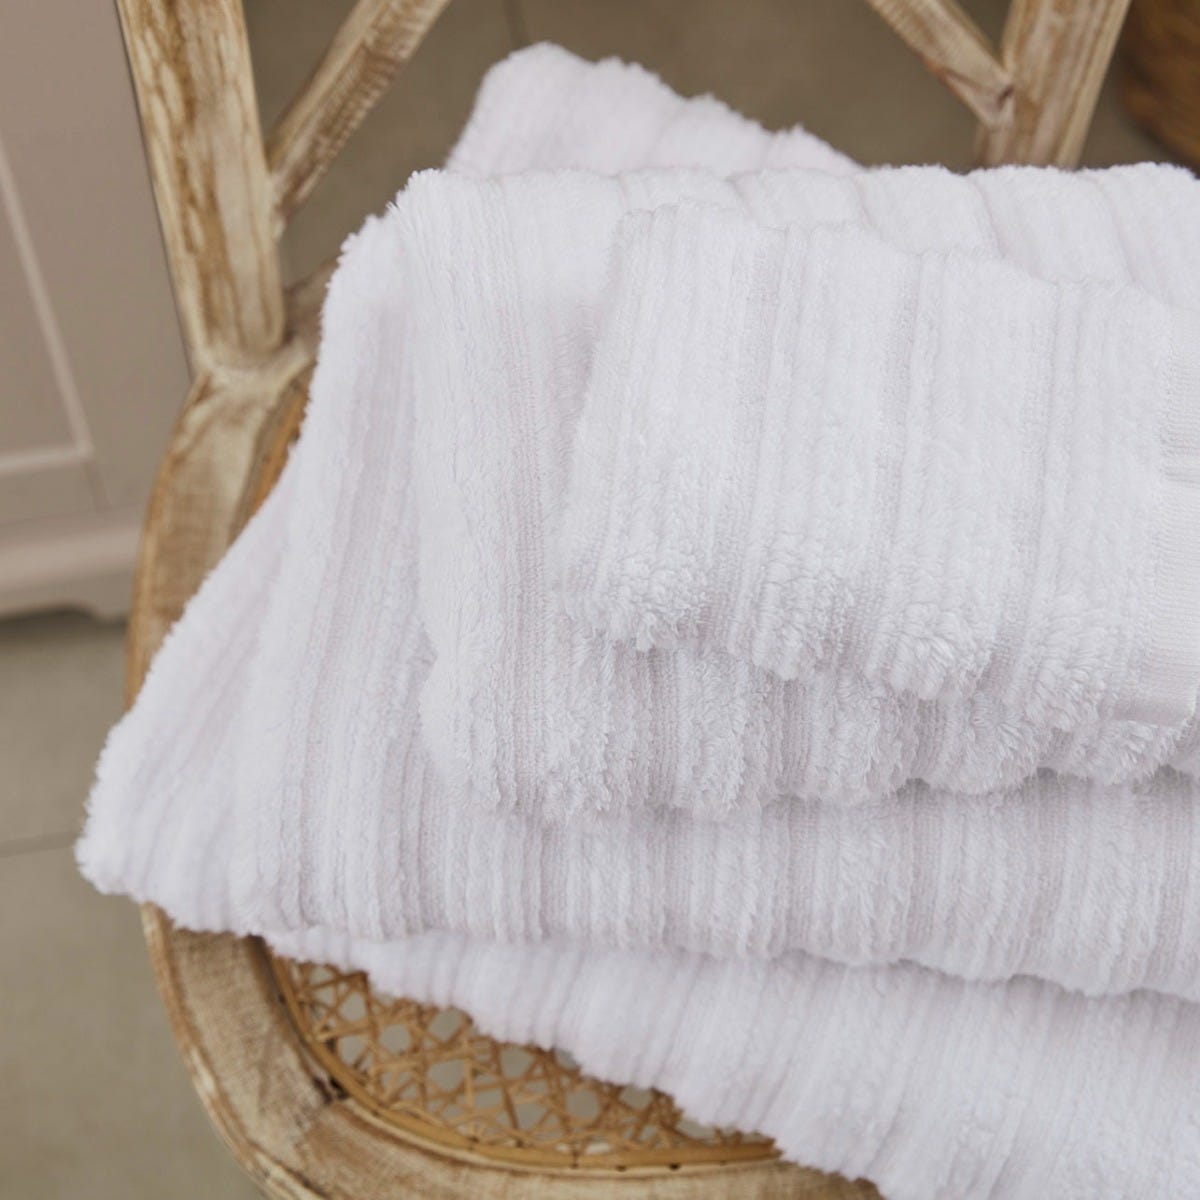 Ribbed Cotton Towel Collection - White - DUSK